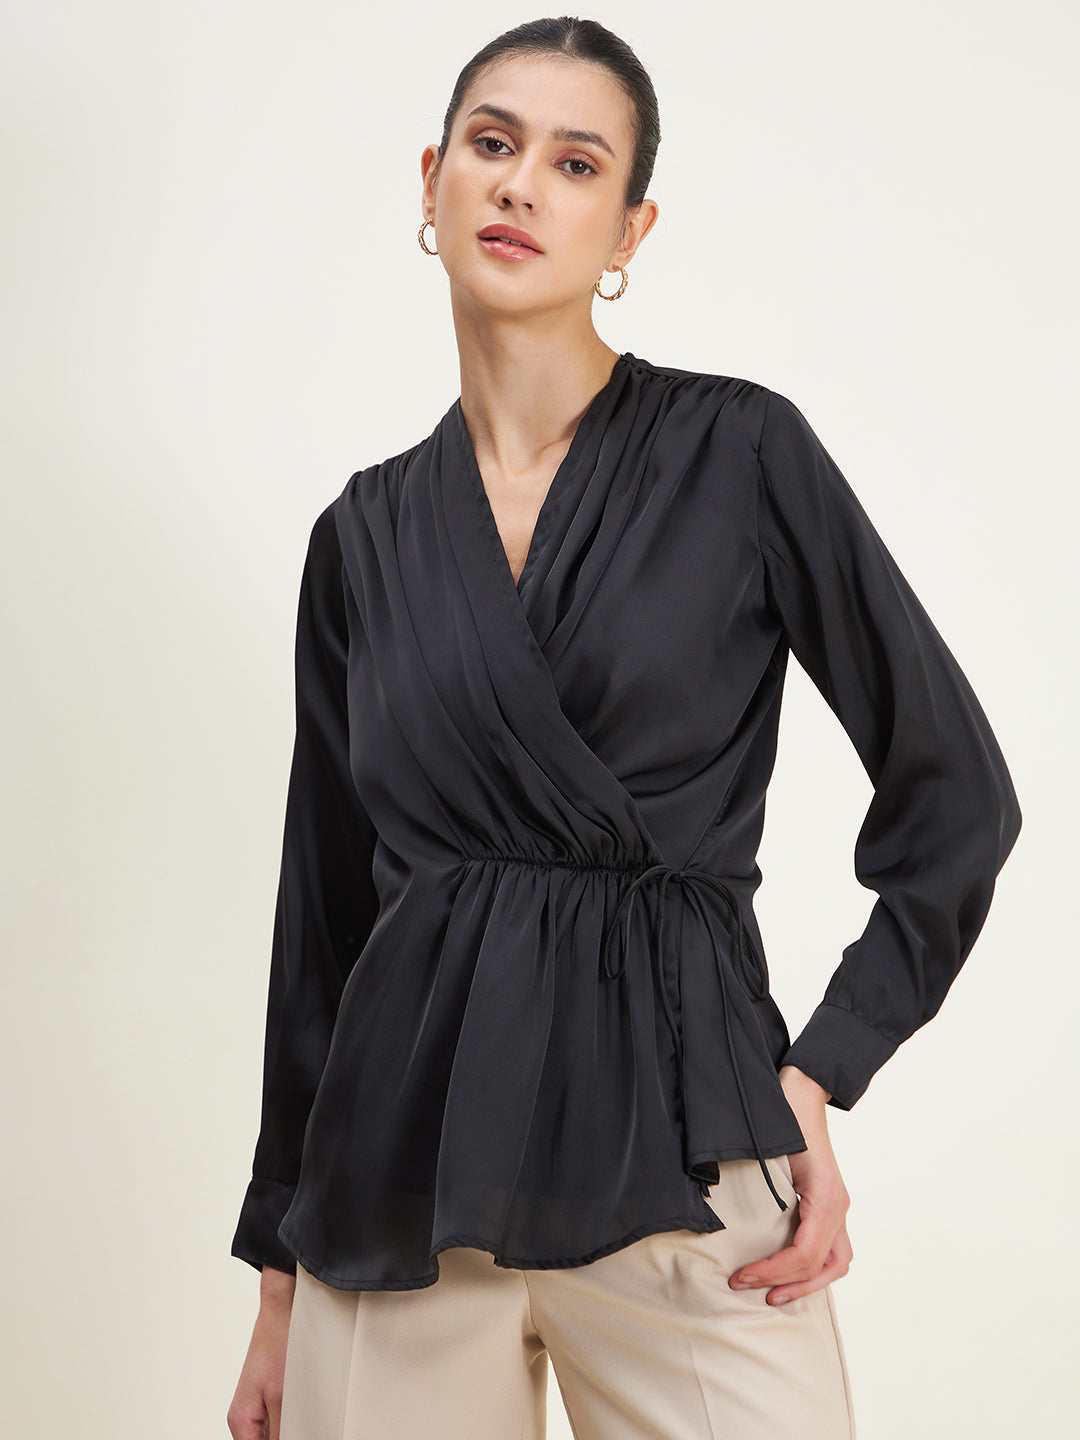 Black Formal Pleated Wrap Top